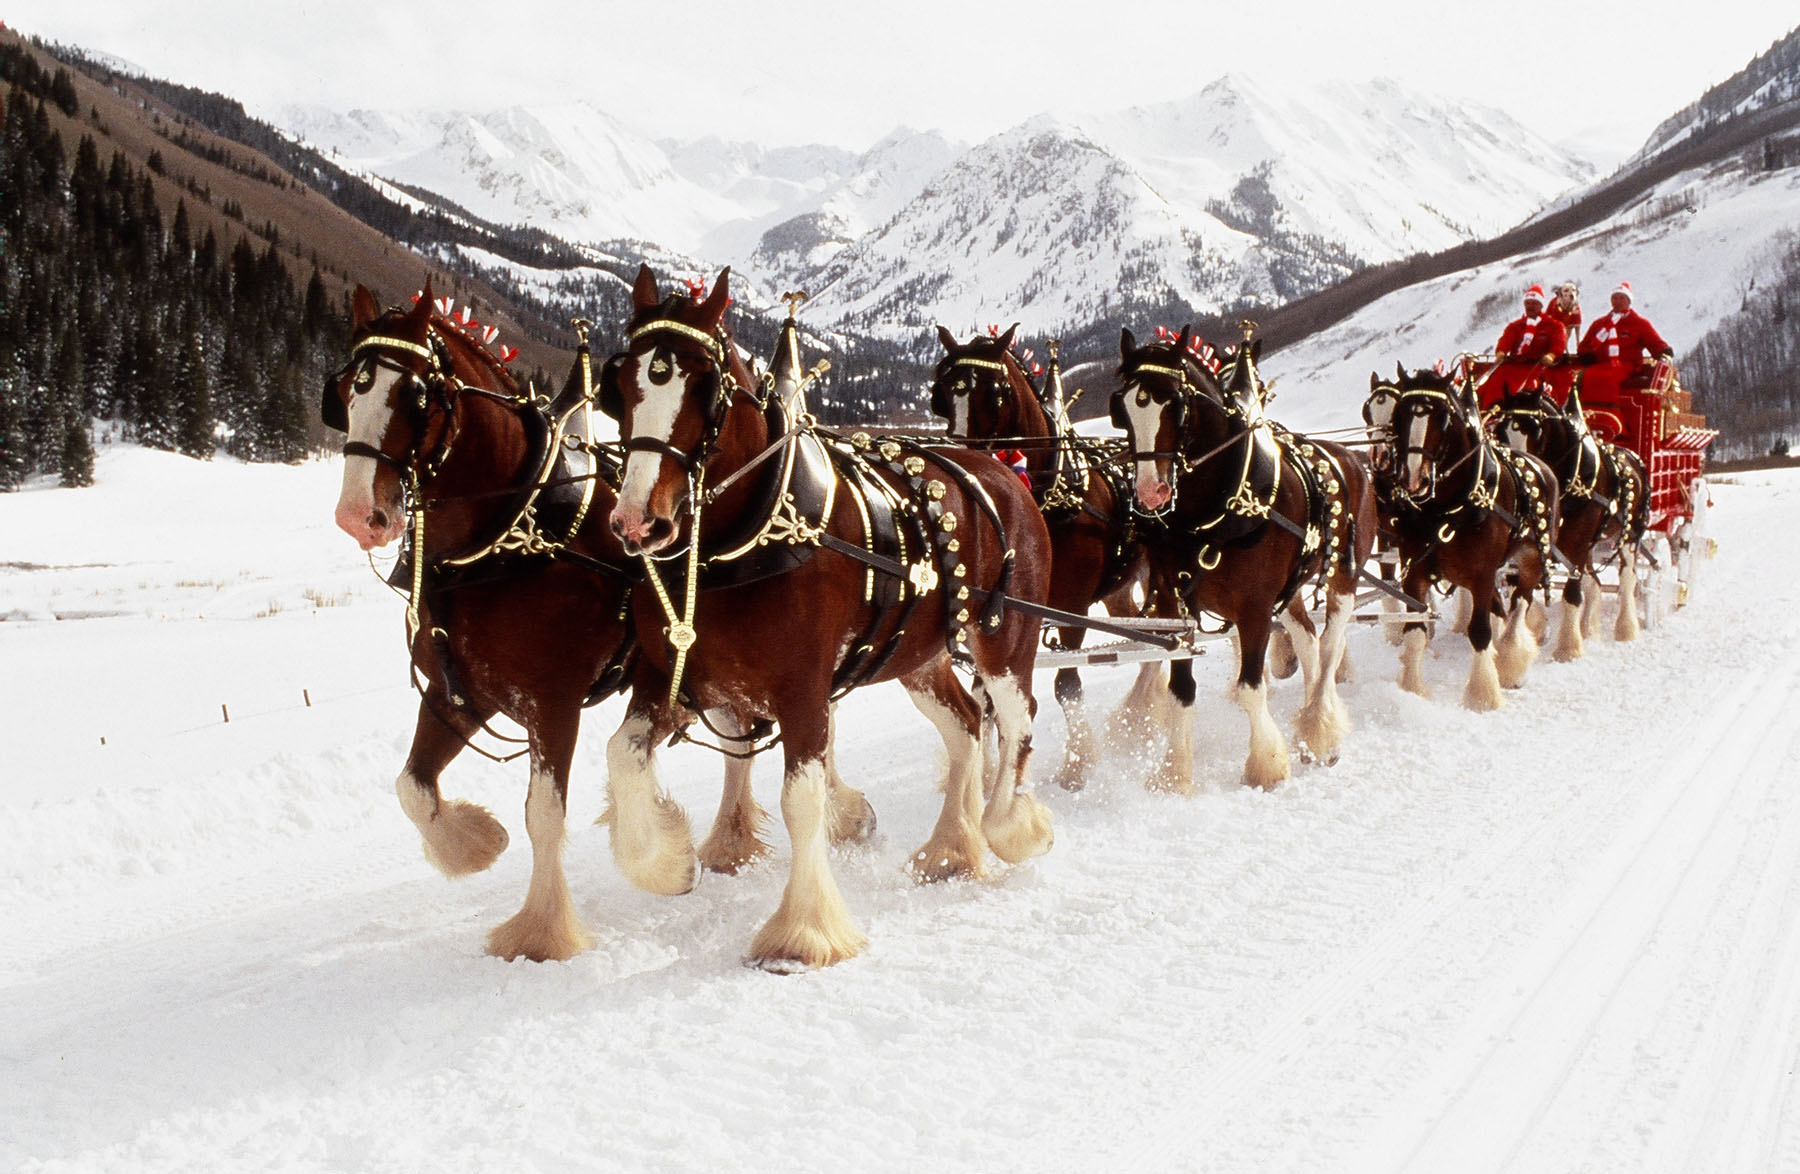 World Renowned Budweiser Clydesdales To Appear At Museum